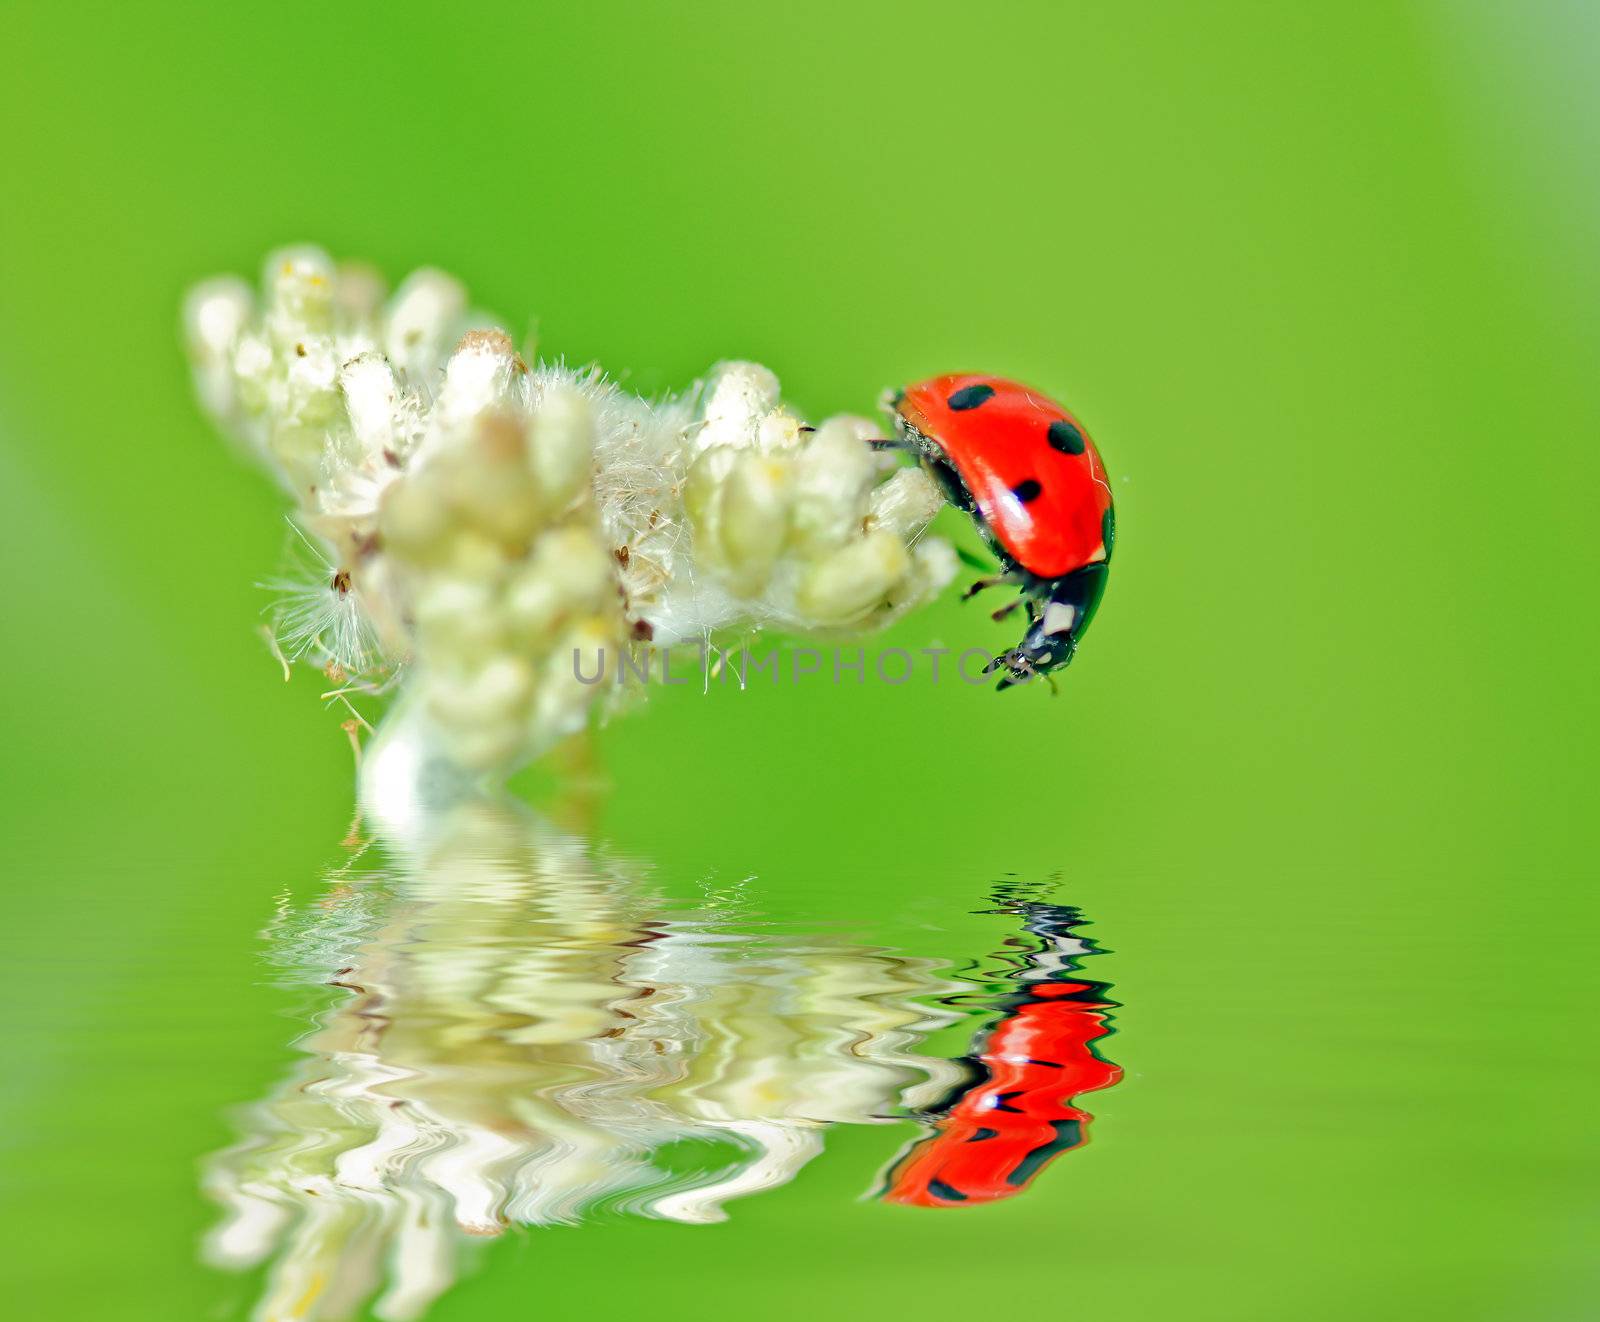 Red ladybug spend parked in the white flower